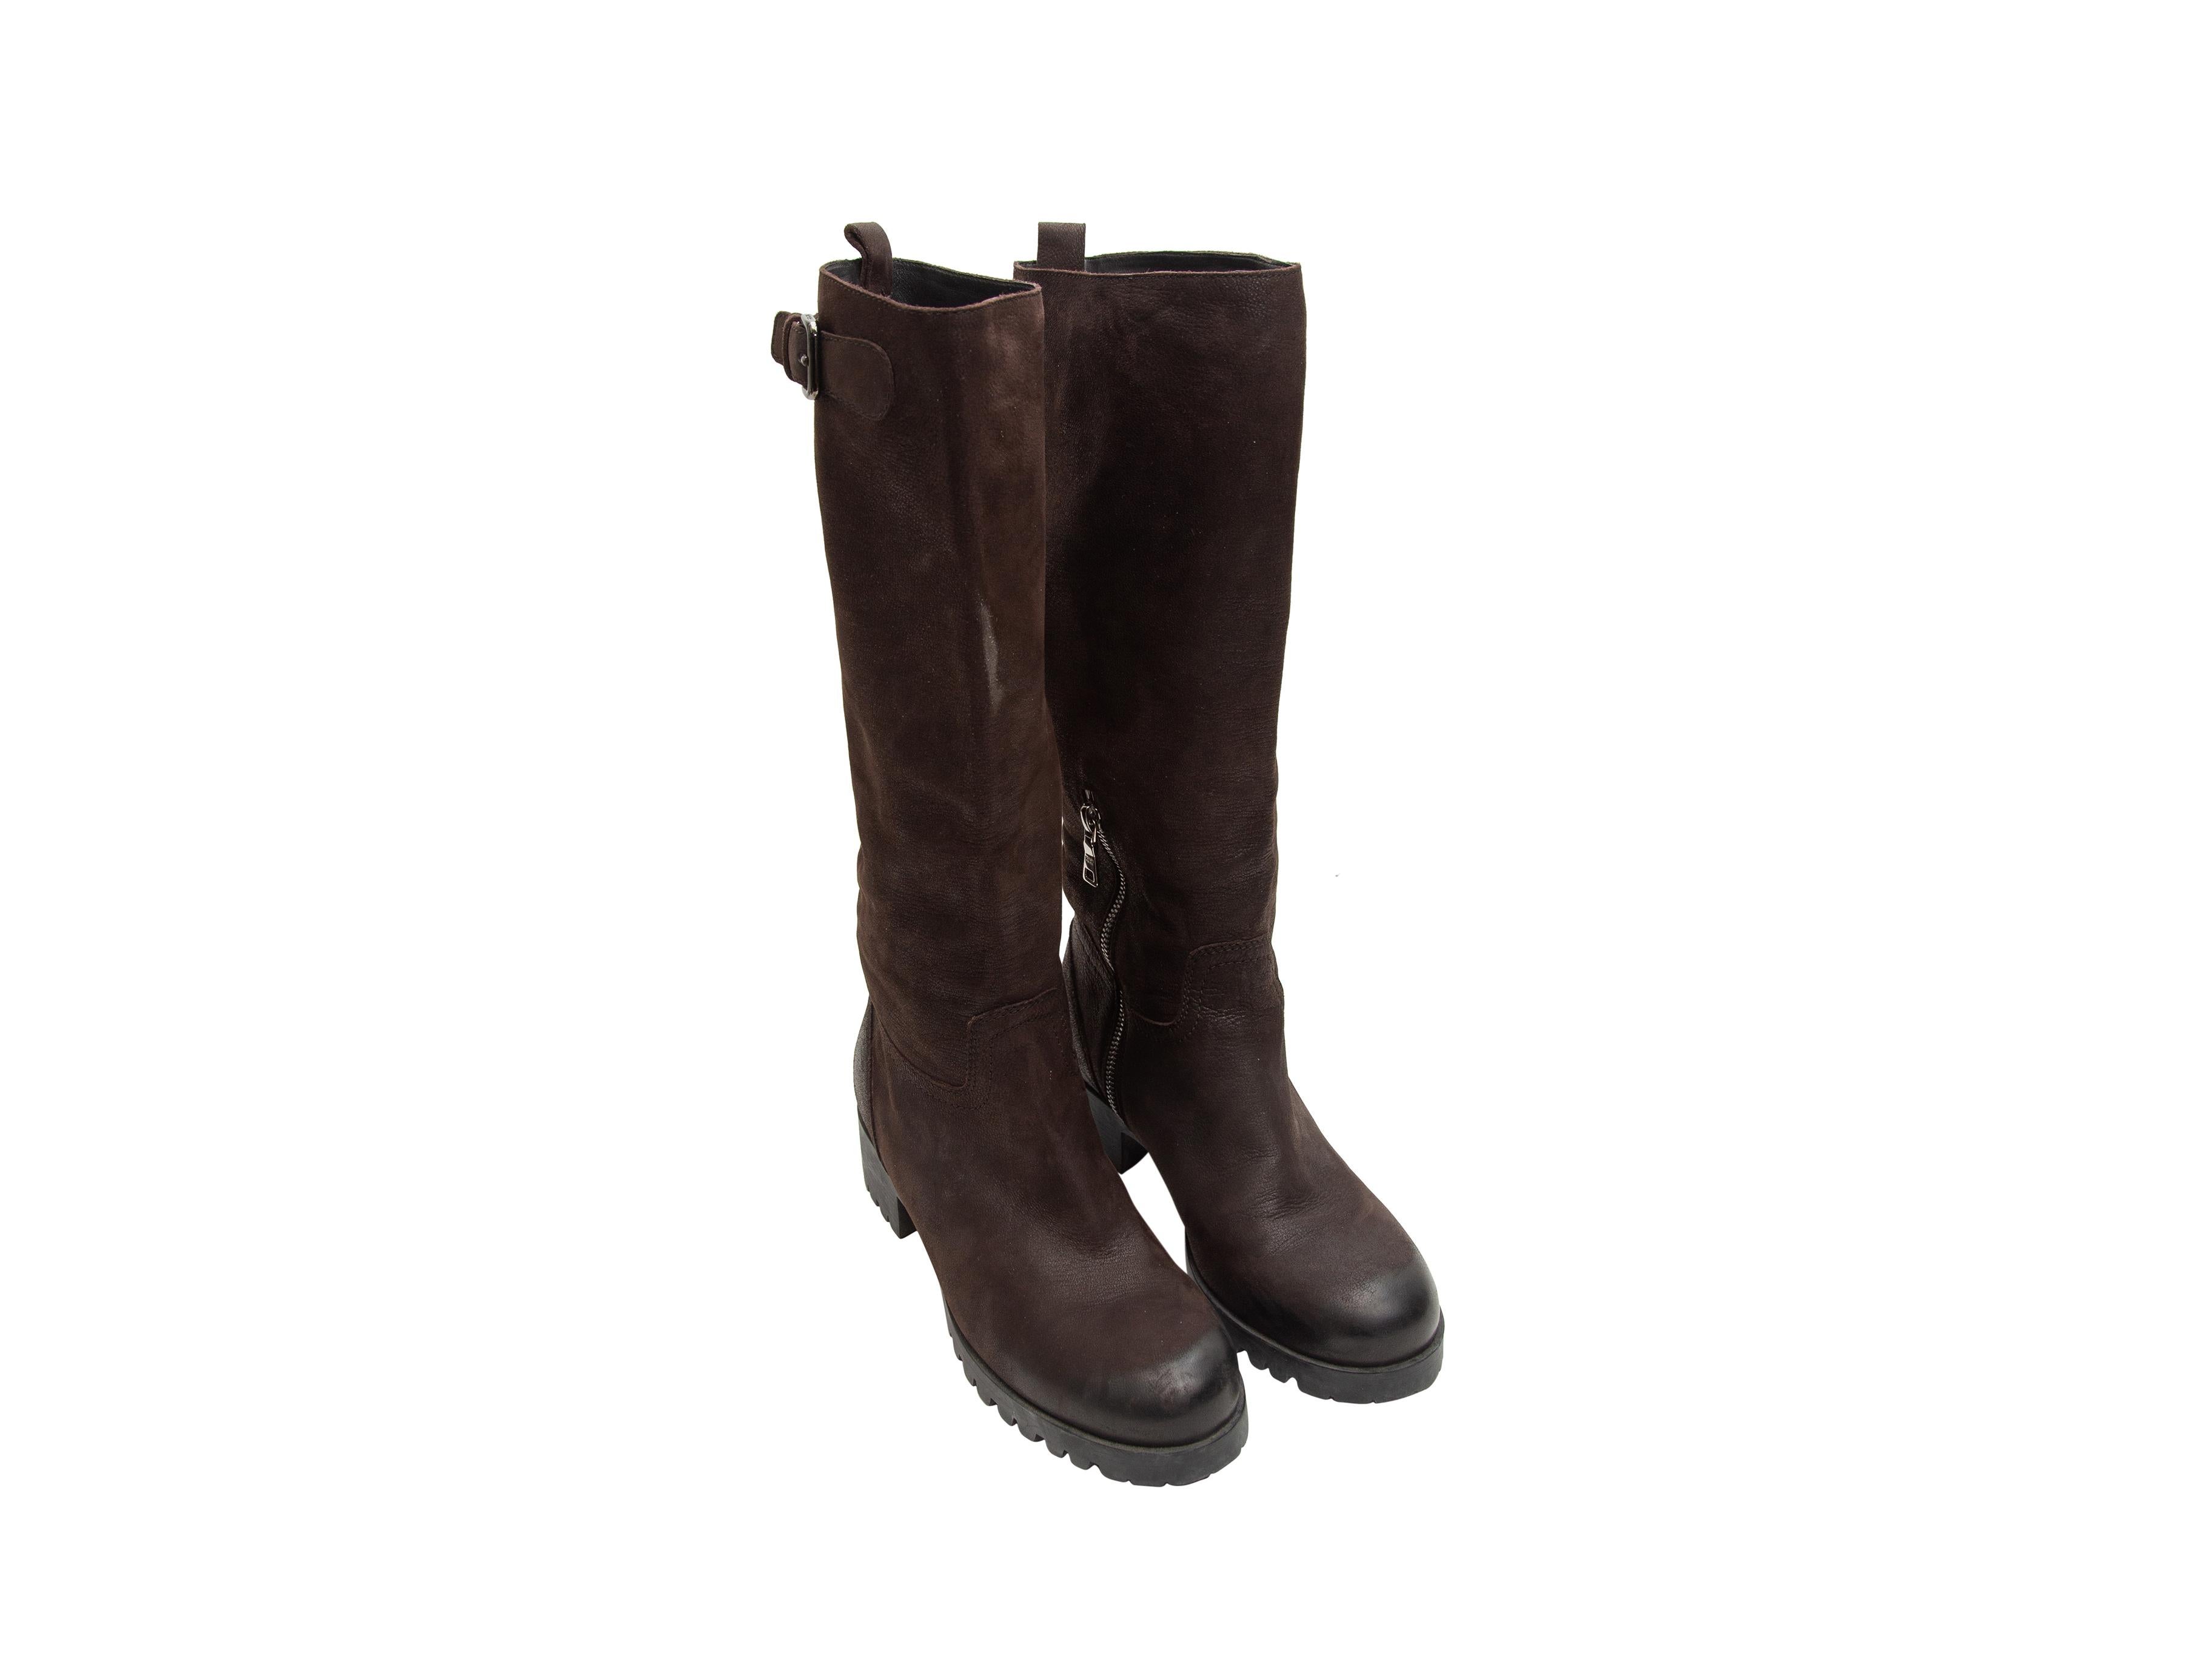 Product details: Dark brown leather tall riding boots by Prada. Buckle accents at outer sides. Lug soles. Zip closures at inner sides. Designer size 38. 1.5